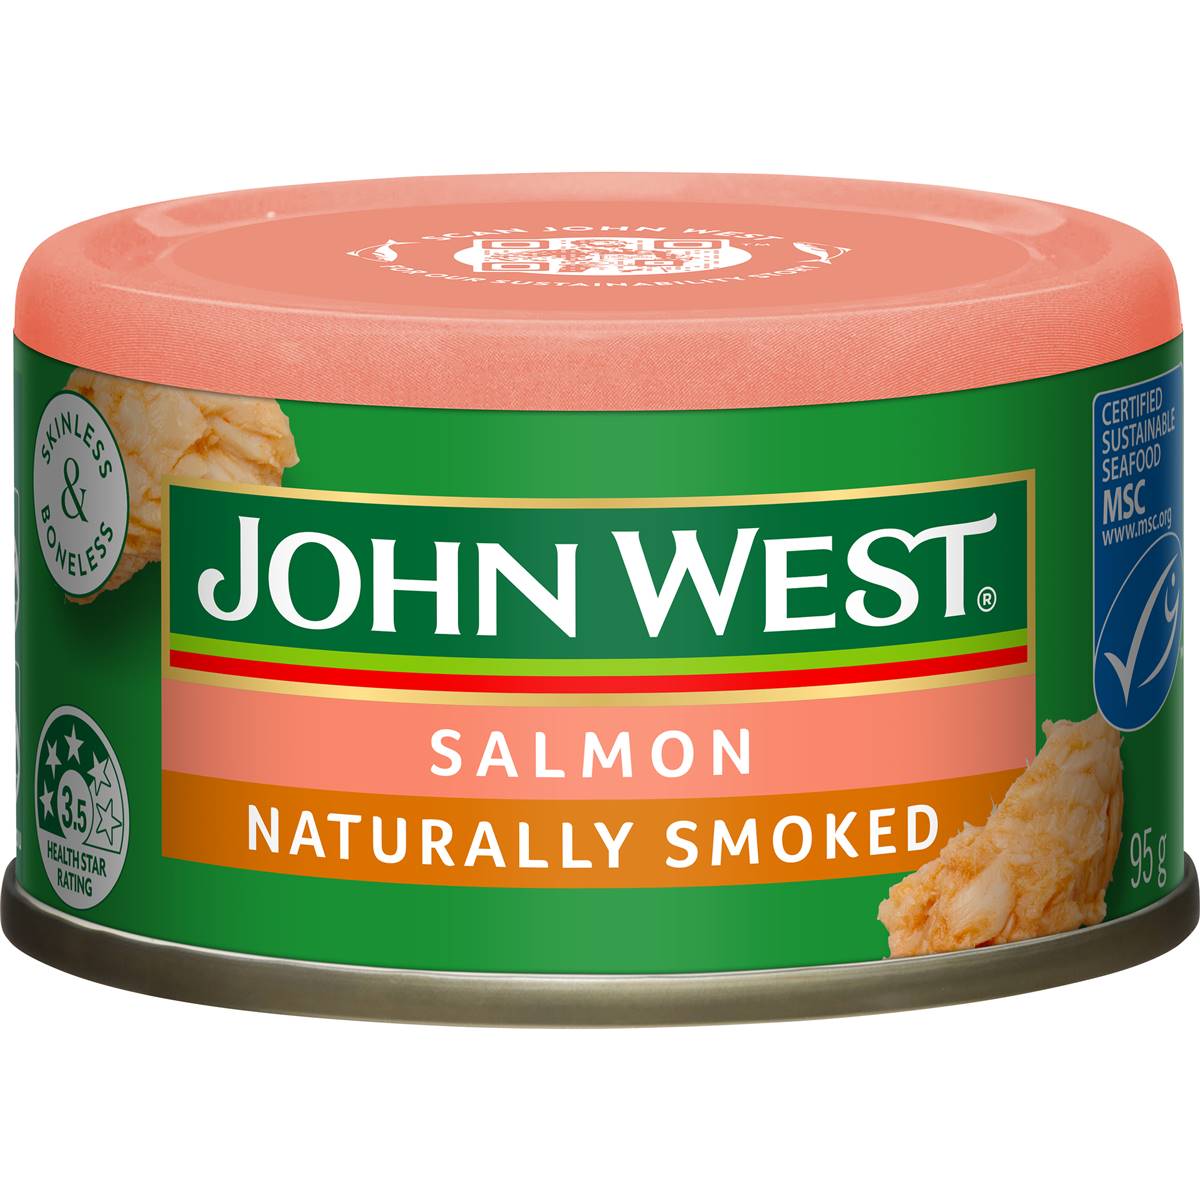 Calories in John West Salmon Tempters Naturally Smoked